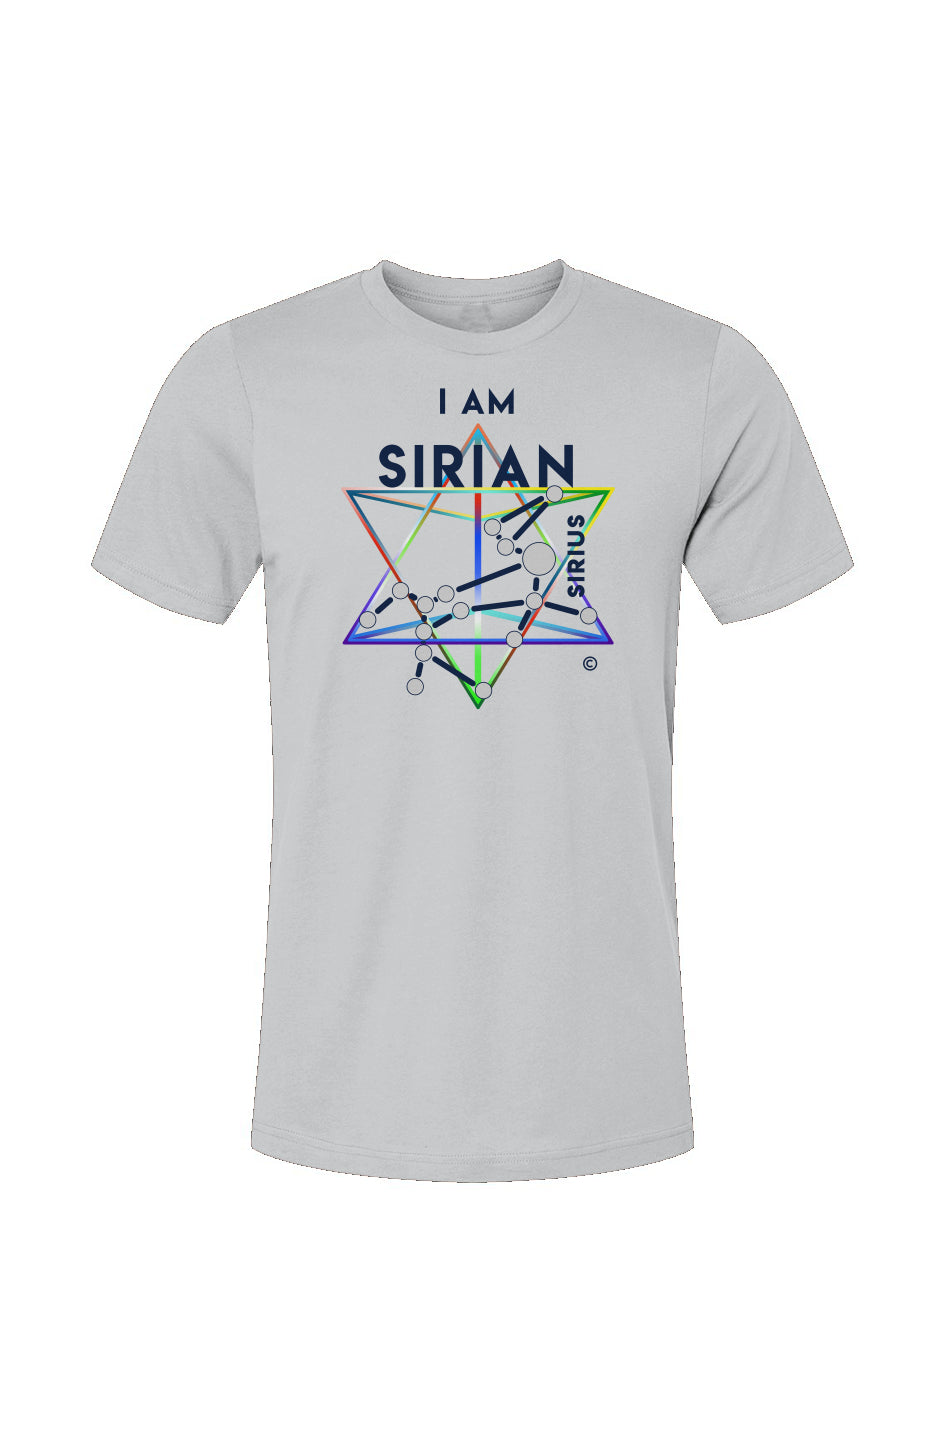 the sirian collection: men's t-shirts